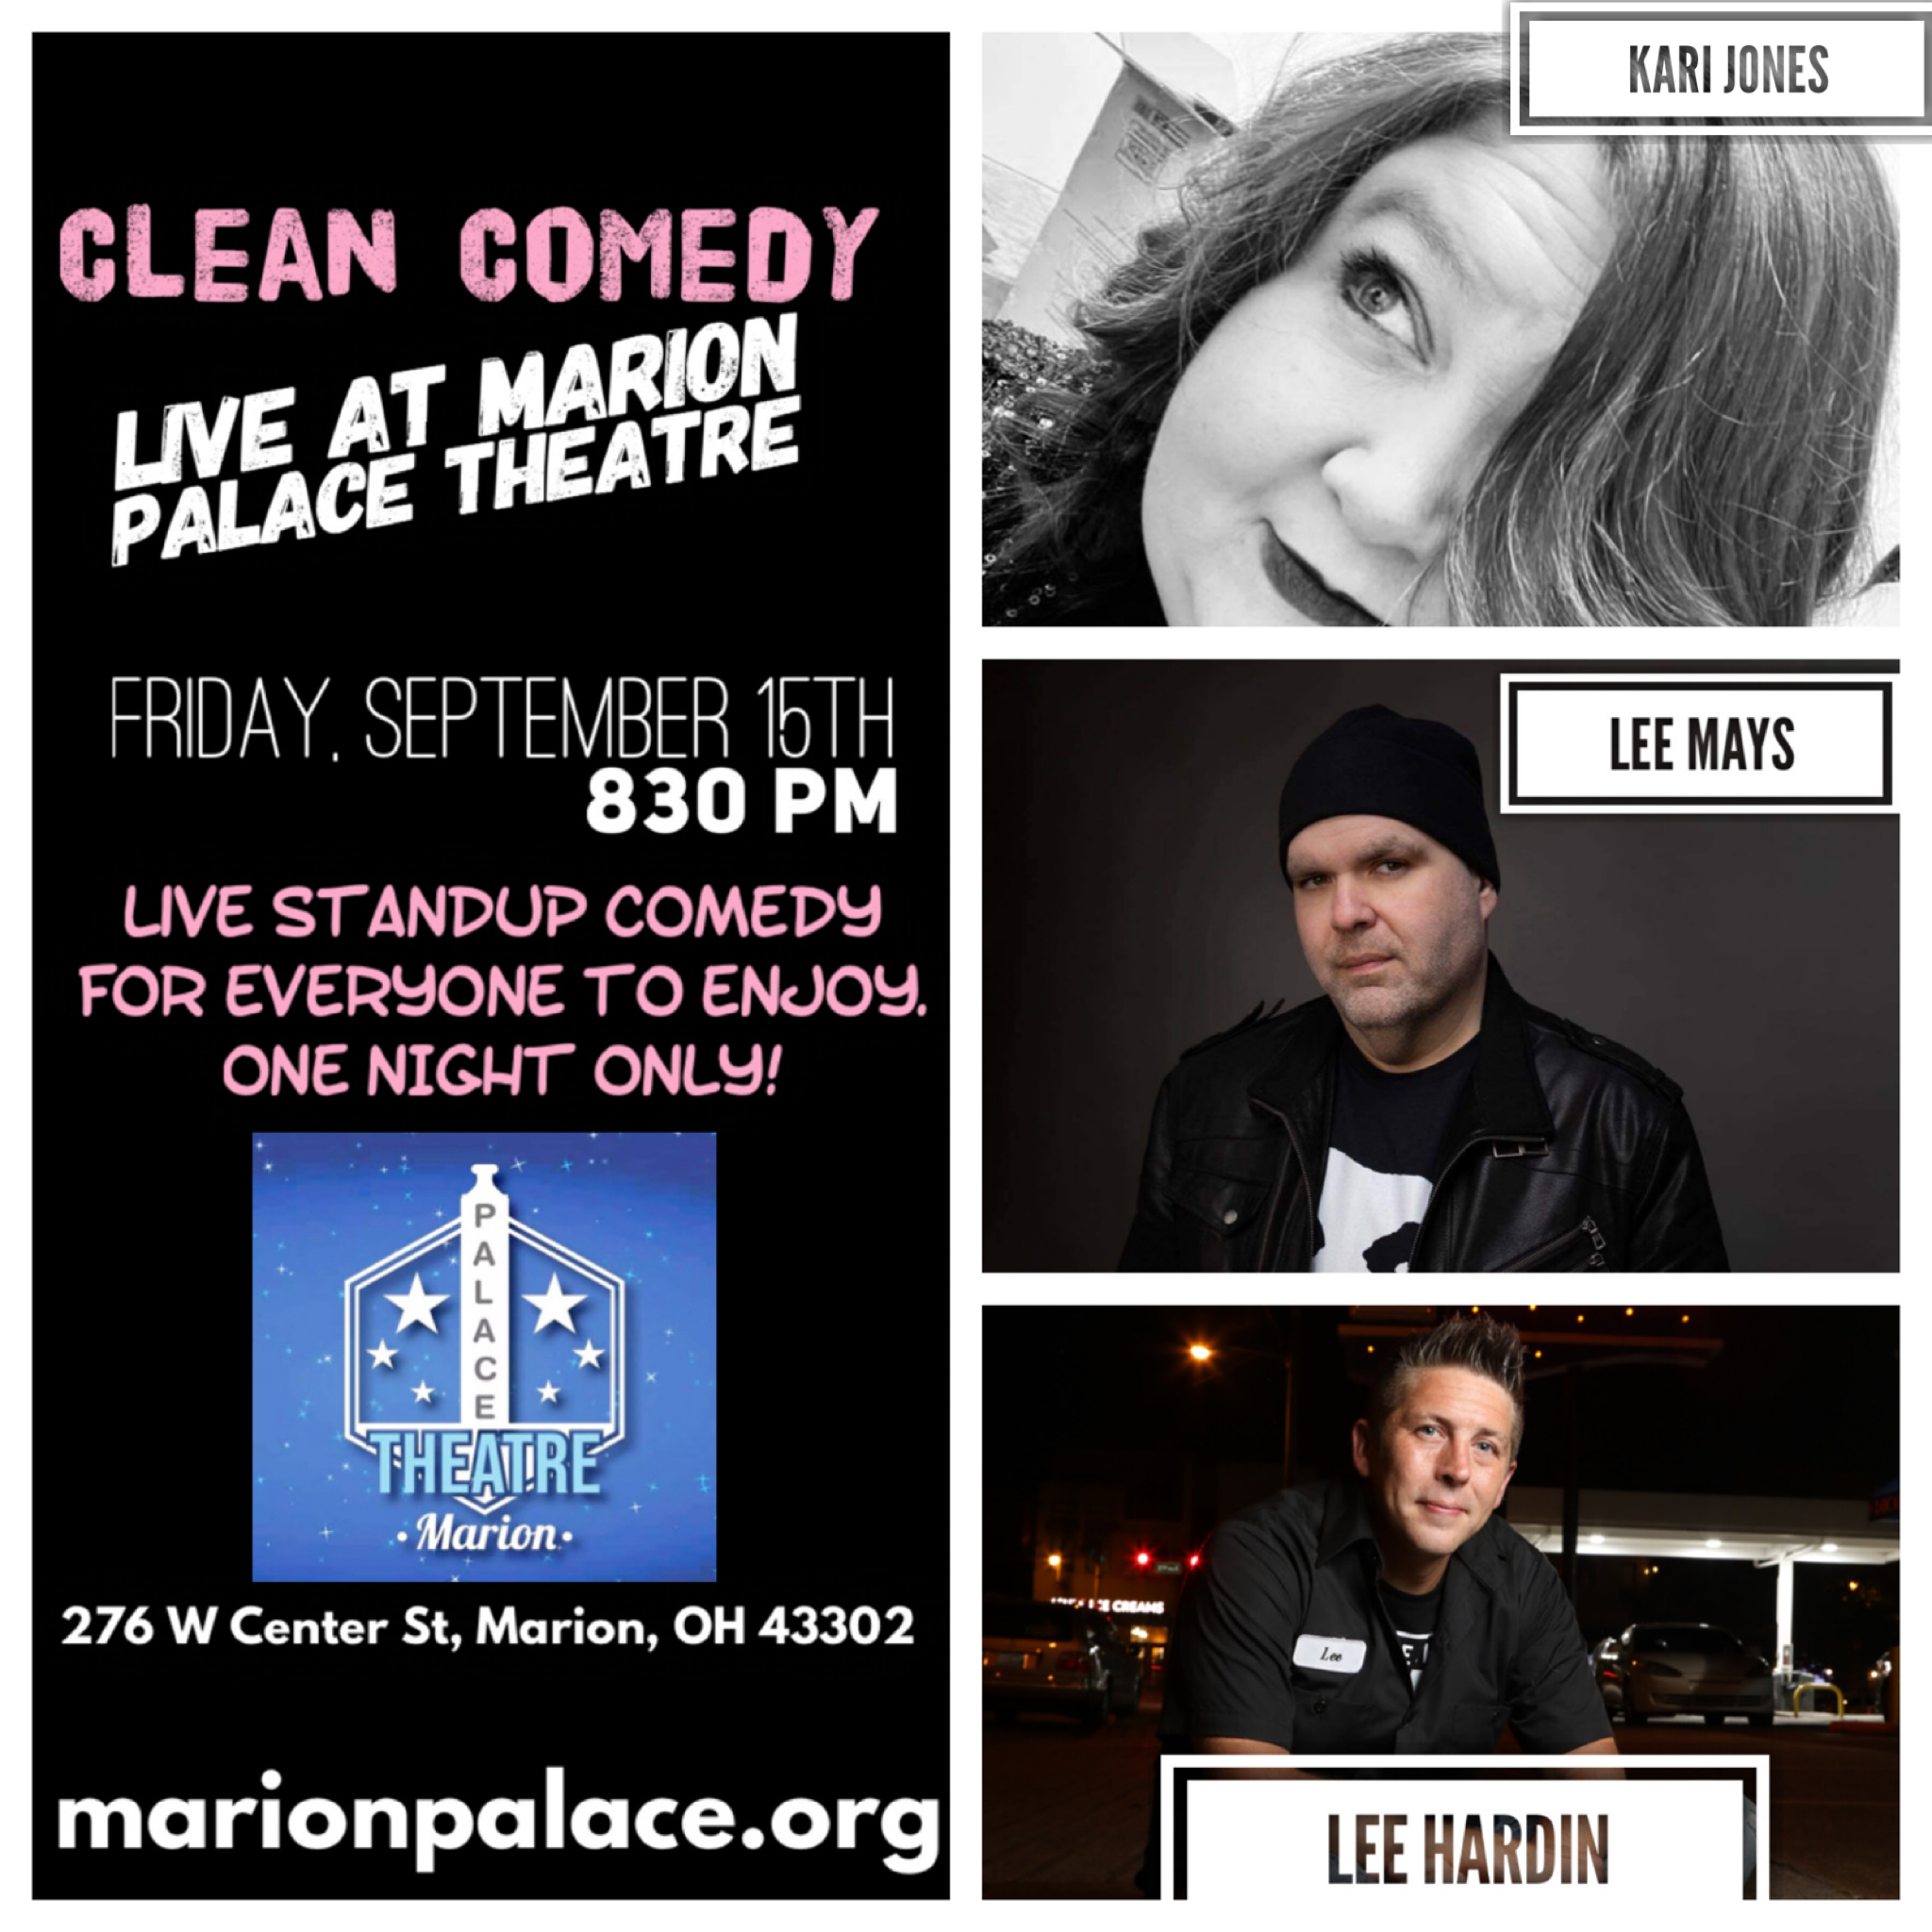 Clean Comedy poster with pictures of the performers -- Kari Jones, Lee Mays, and Lee Hardin -- and the Palace logo